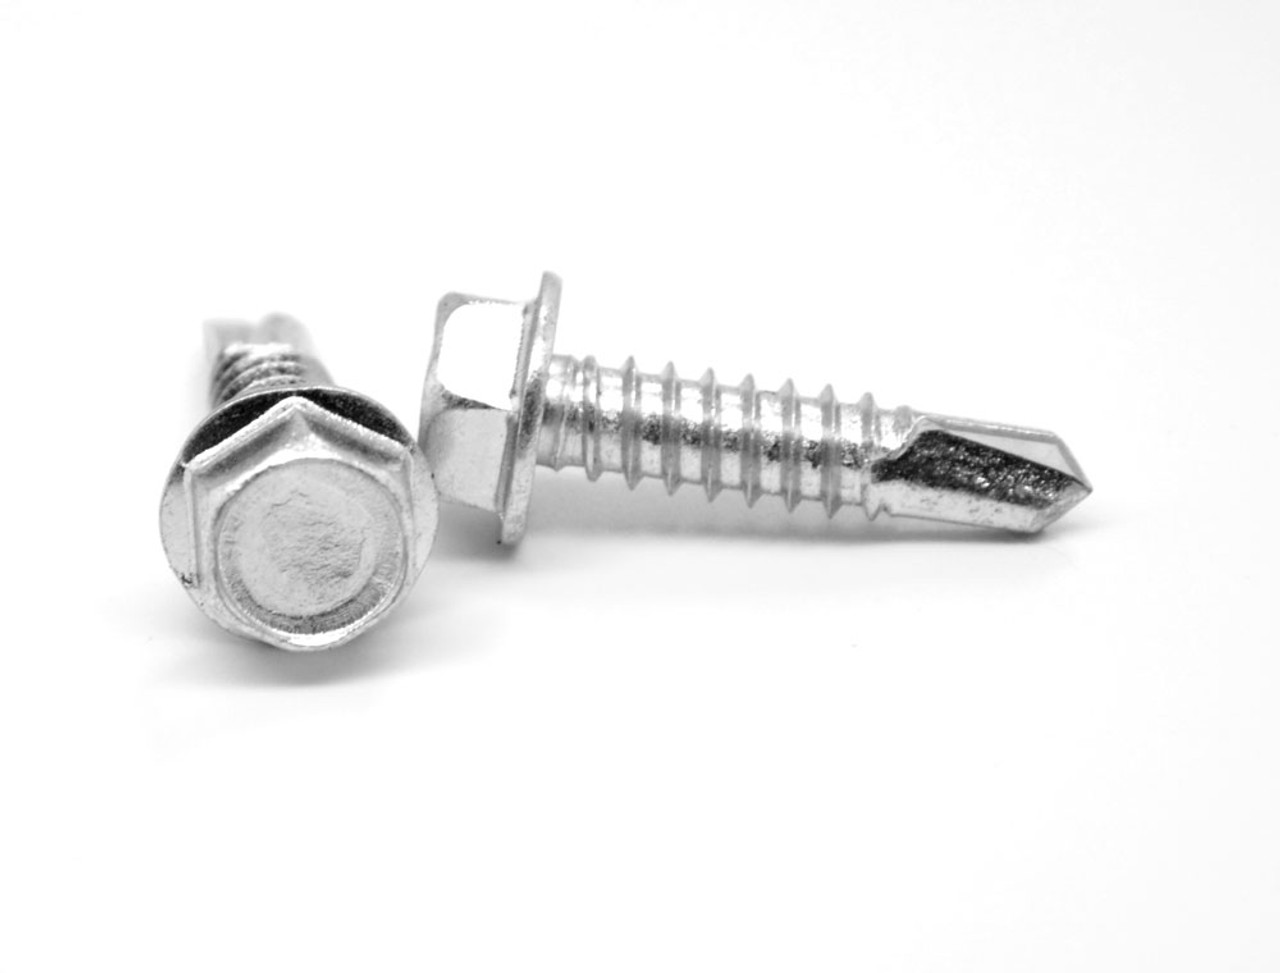 #12-14 x 5/8" (FT) Self Drilling Screw Hex Washer Head #3 Point Stainless Steel 410